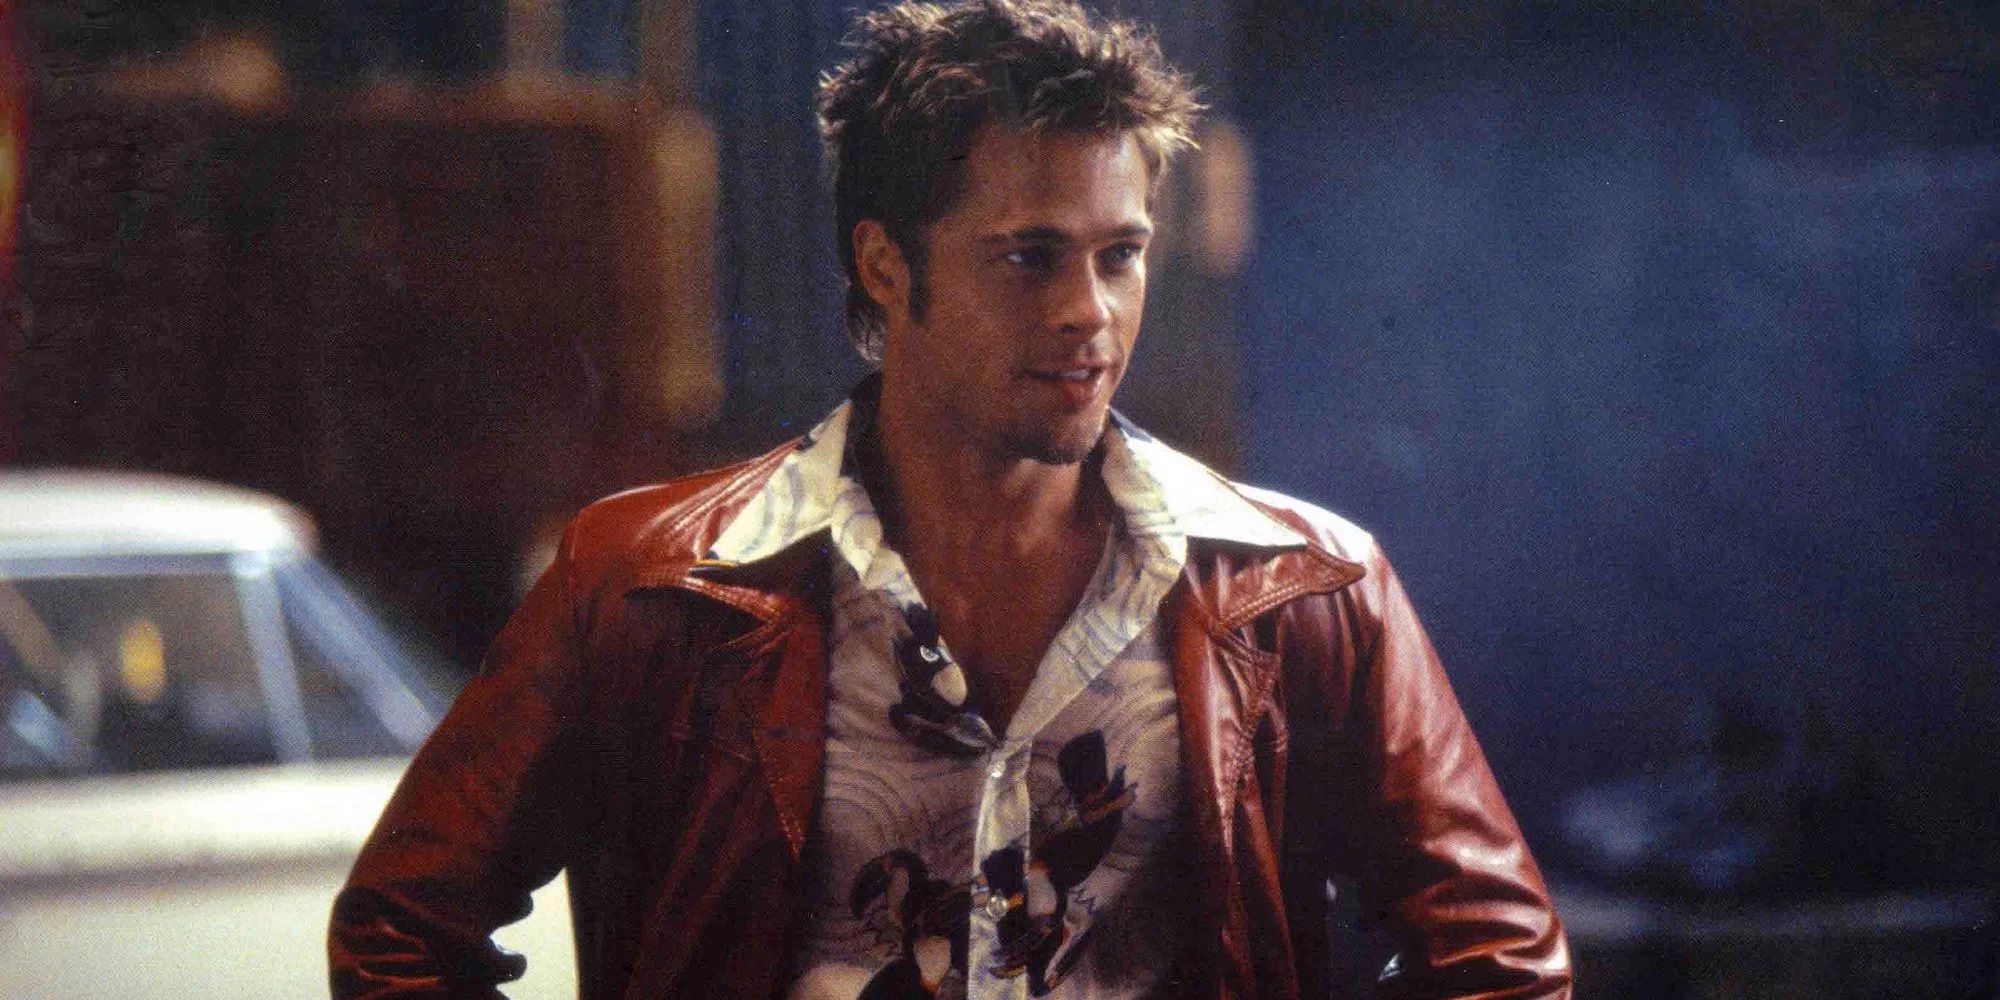 Brad Pitt wearing a red leather jacket in Fight Club